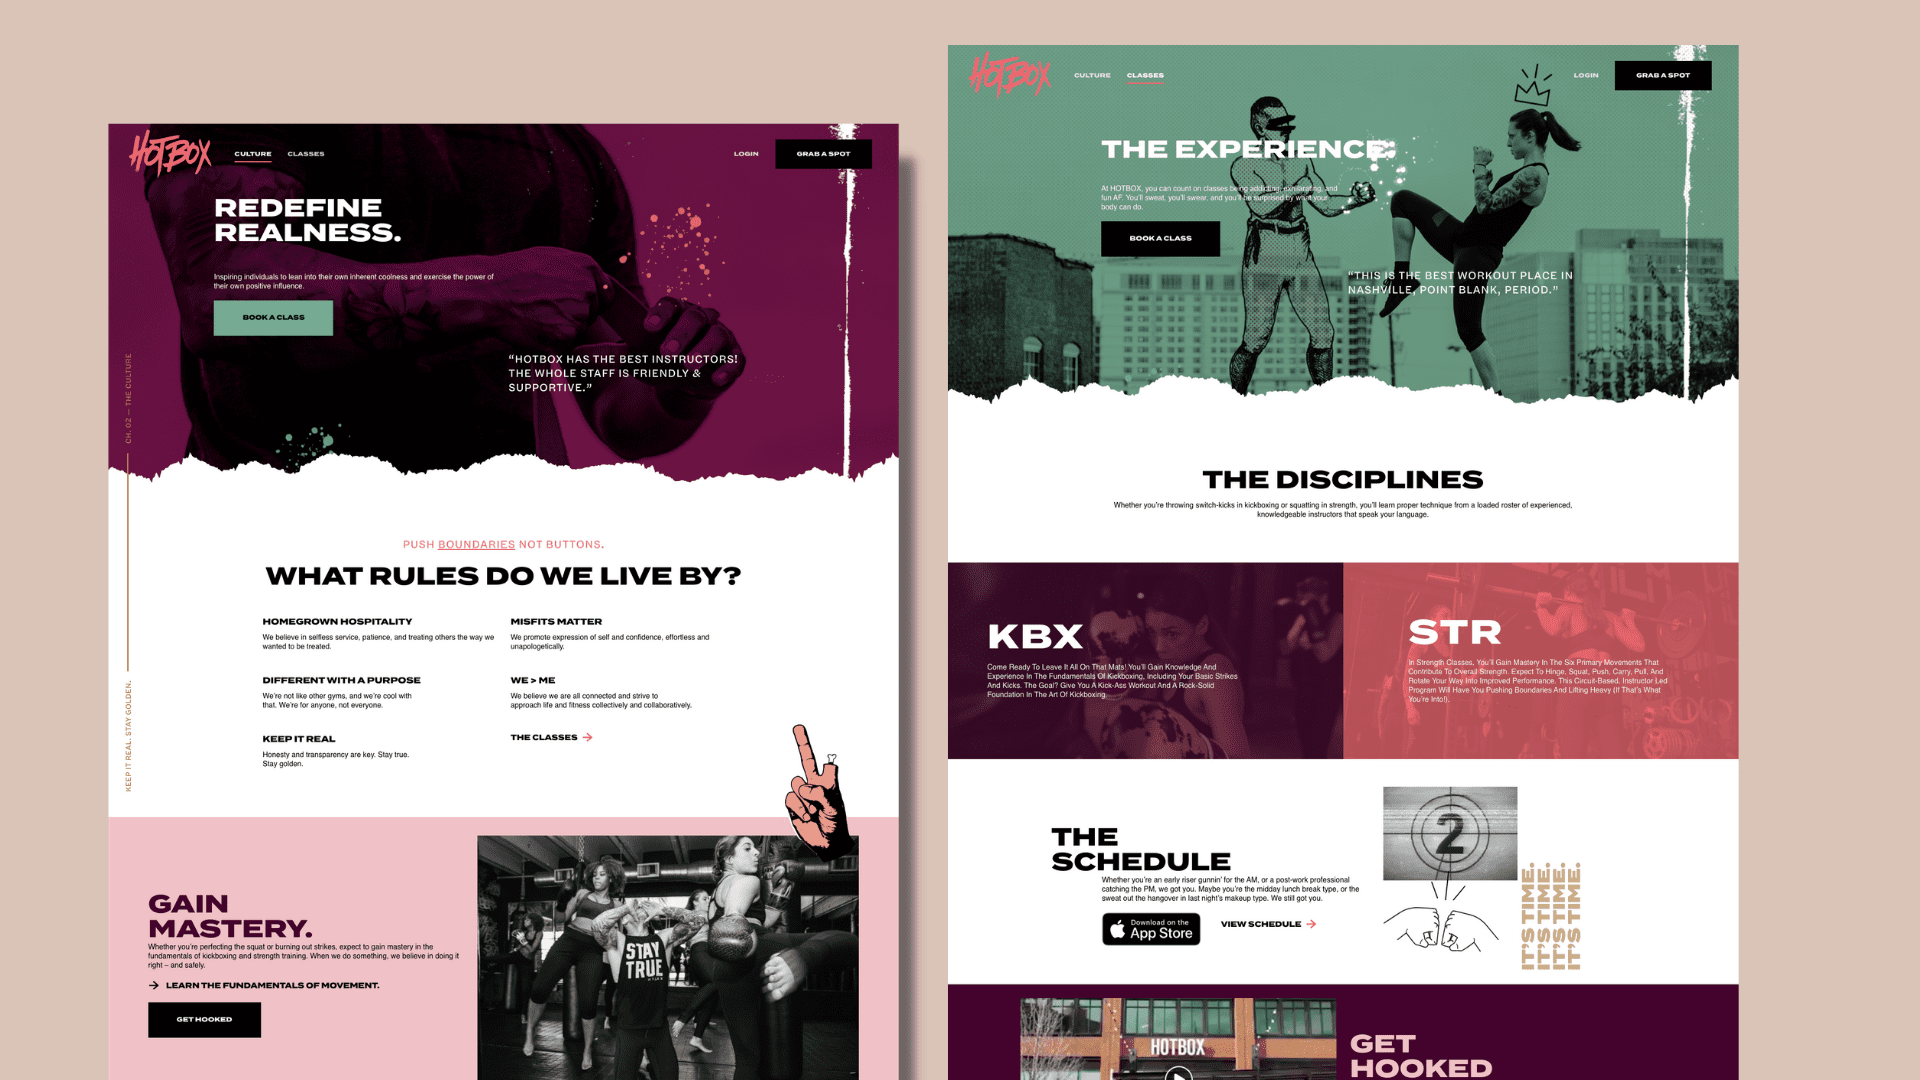 A two page, side by side mockup of the Hotbox website on a pale pink background